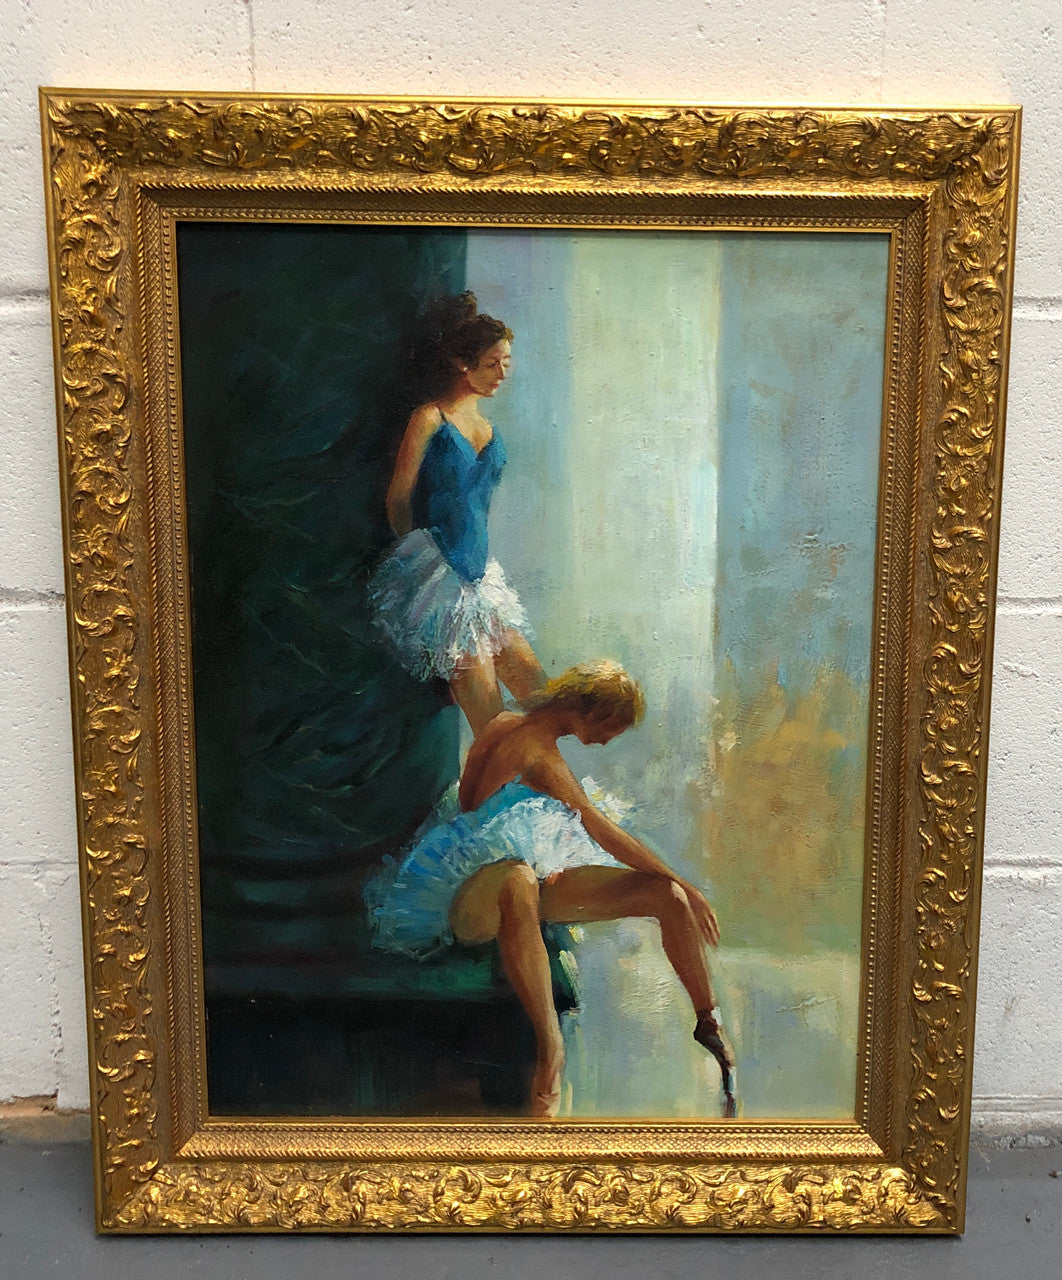 Beautifully framed canvas painting of a pair of ballet dancers. In a very ornate decorative frame. In good original condition.